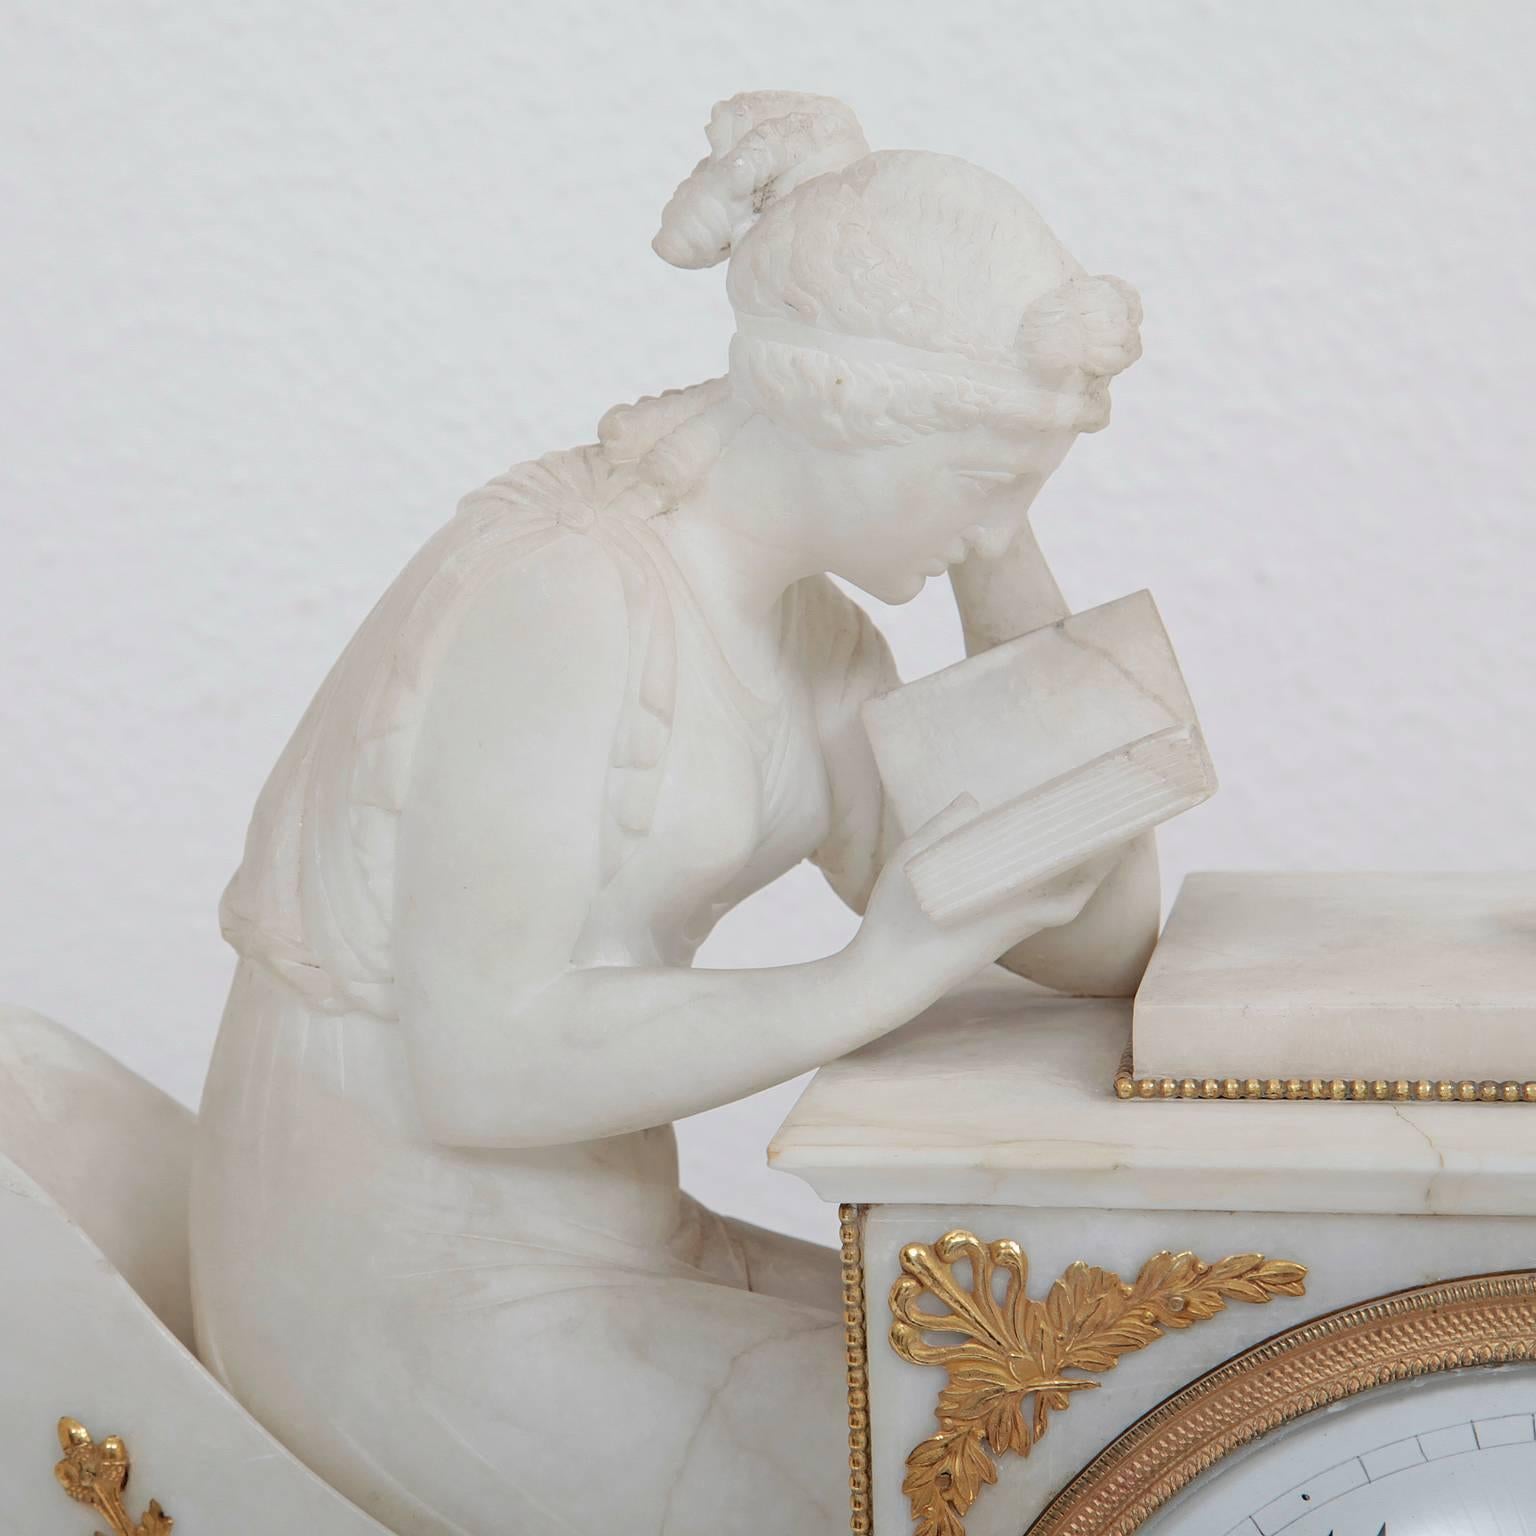 Marble Case with fire gilded classicist bronze-ornaments as well as an enamel clock face with Arabic numerals. A marble figure of a young, reading woman on an armchair completes this clock on its left side.